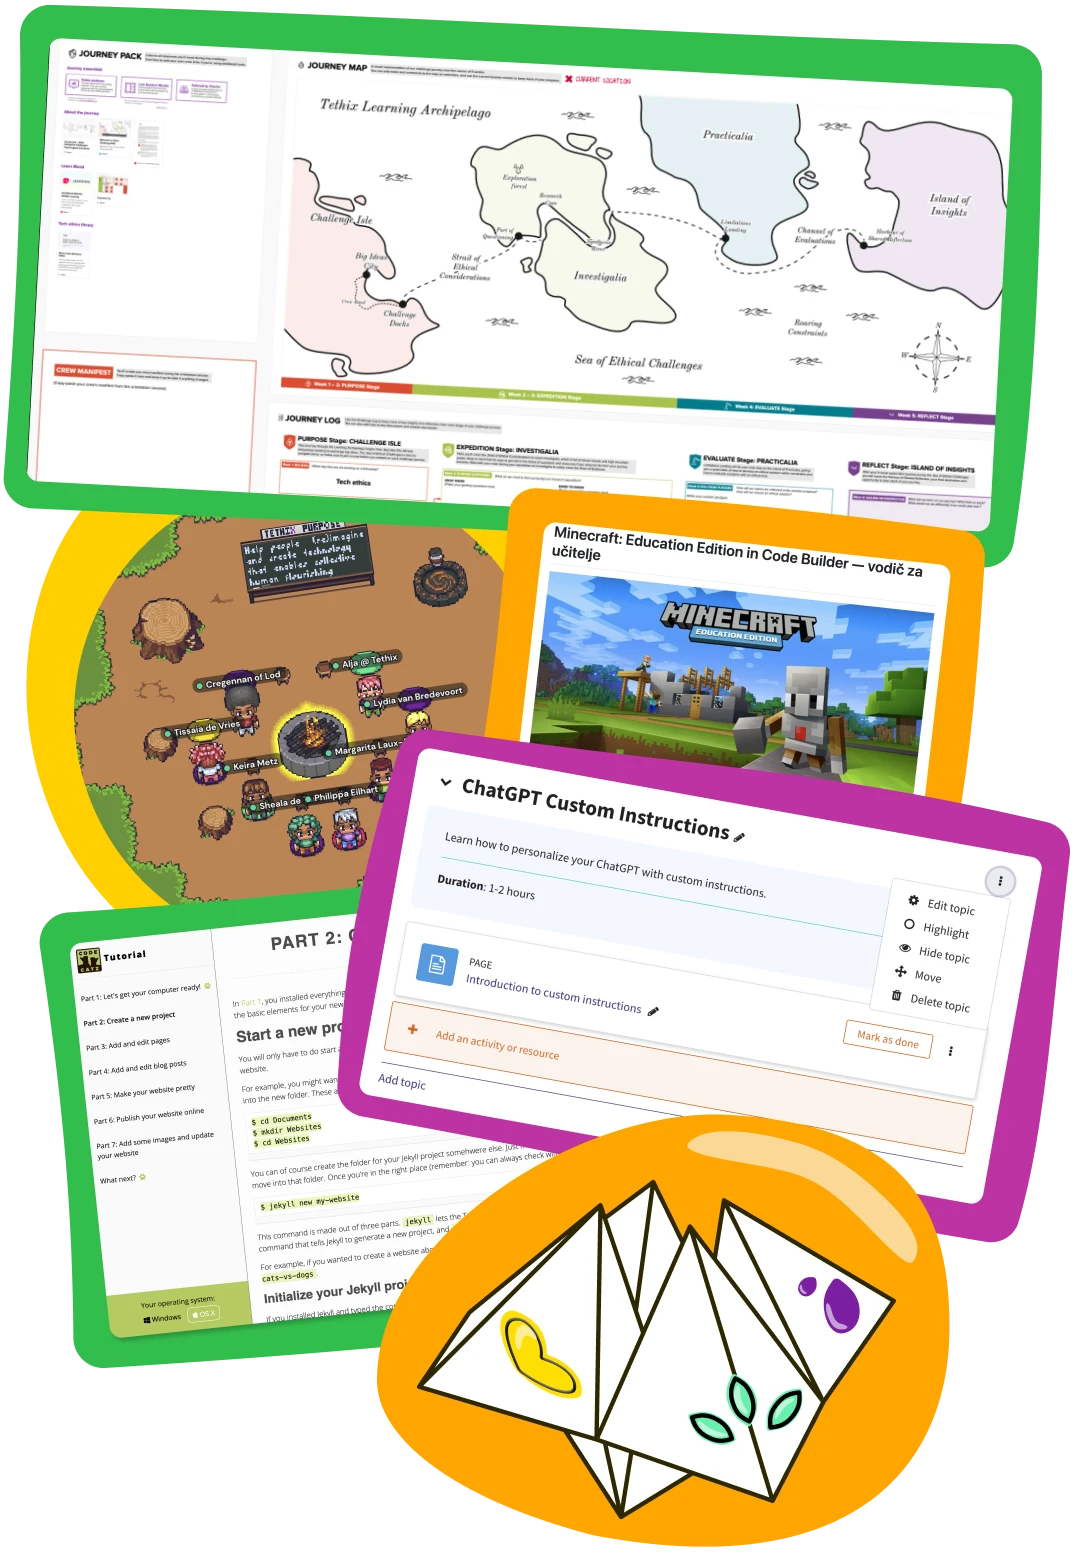 A compilation of screenshots showing several learning resources and activities created by the author.